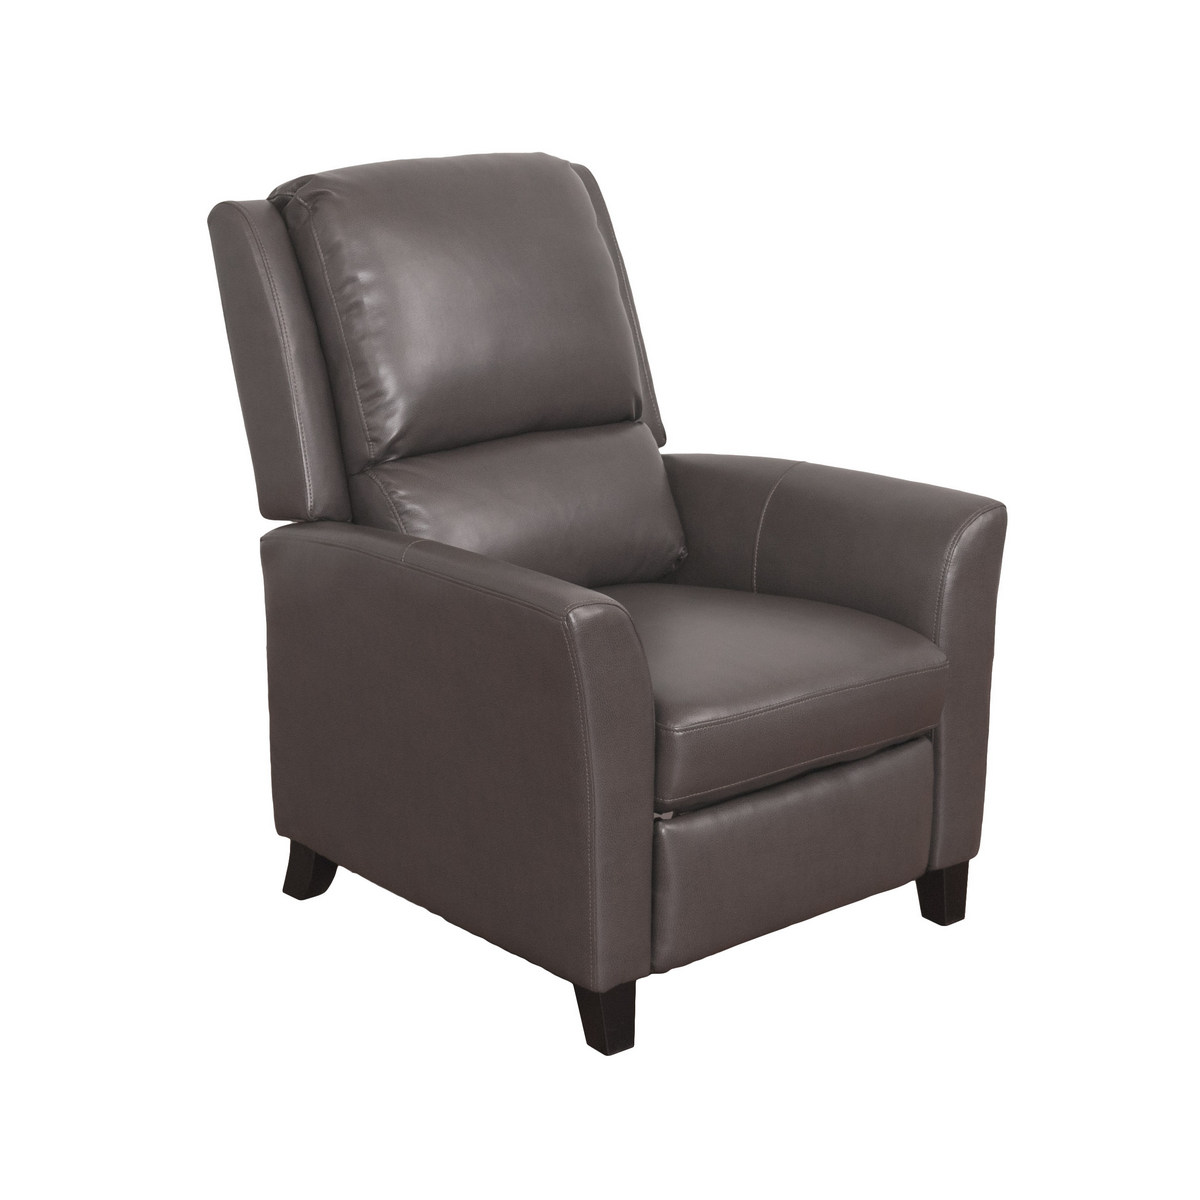 Corliving Lzy-523-r Kate Brownish-grey Bonded Leather Recliner